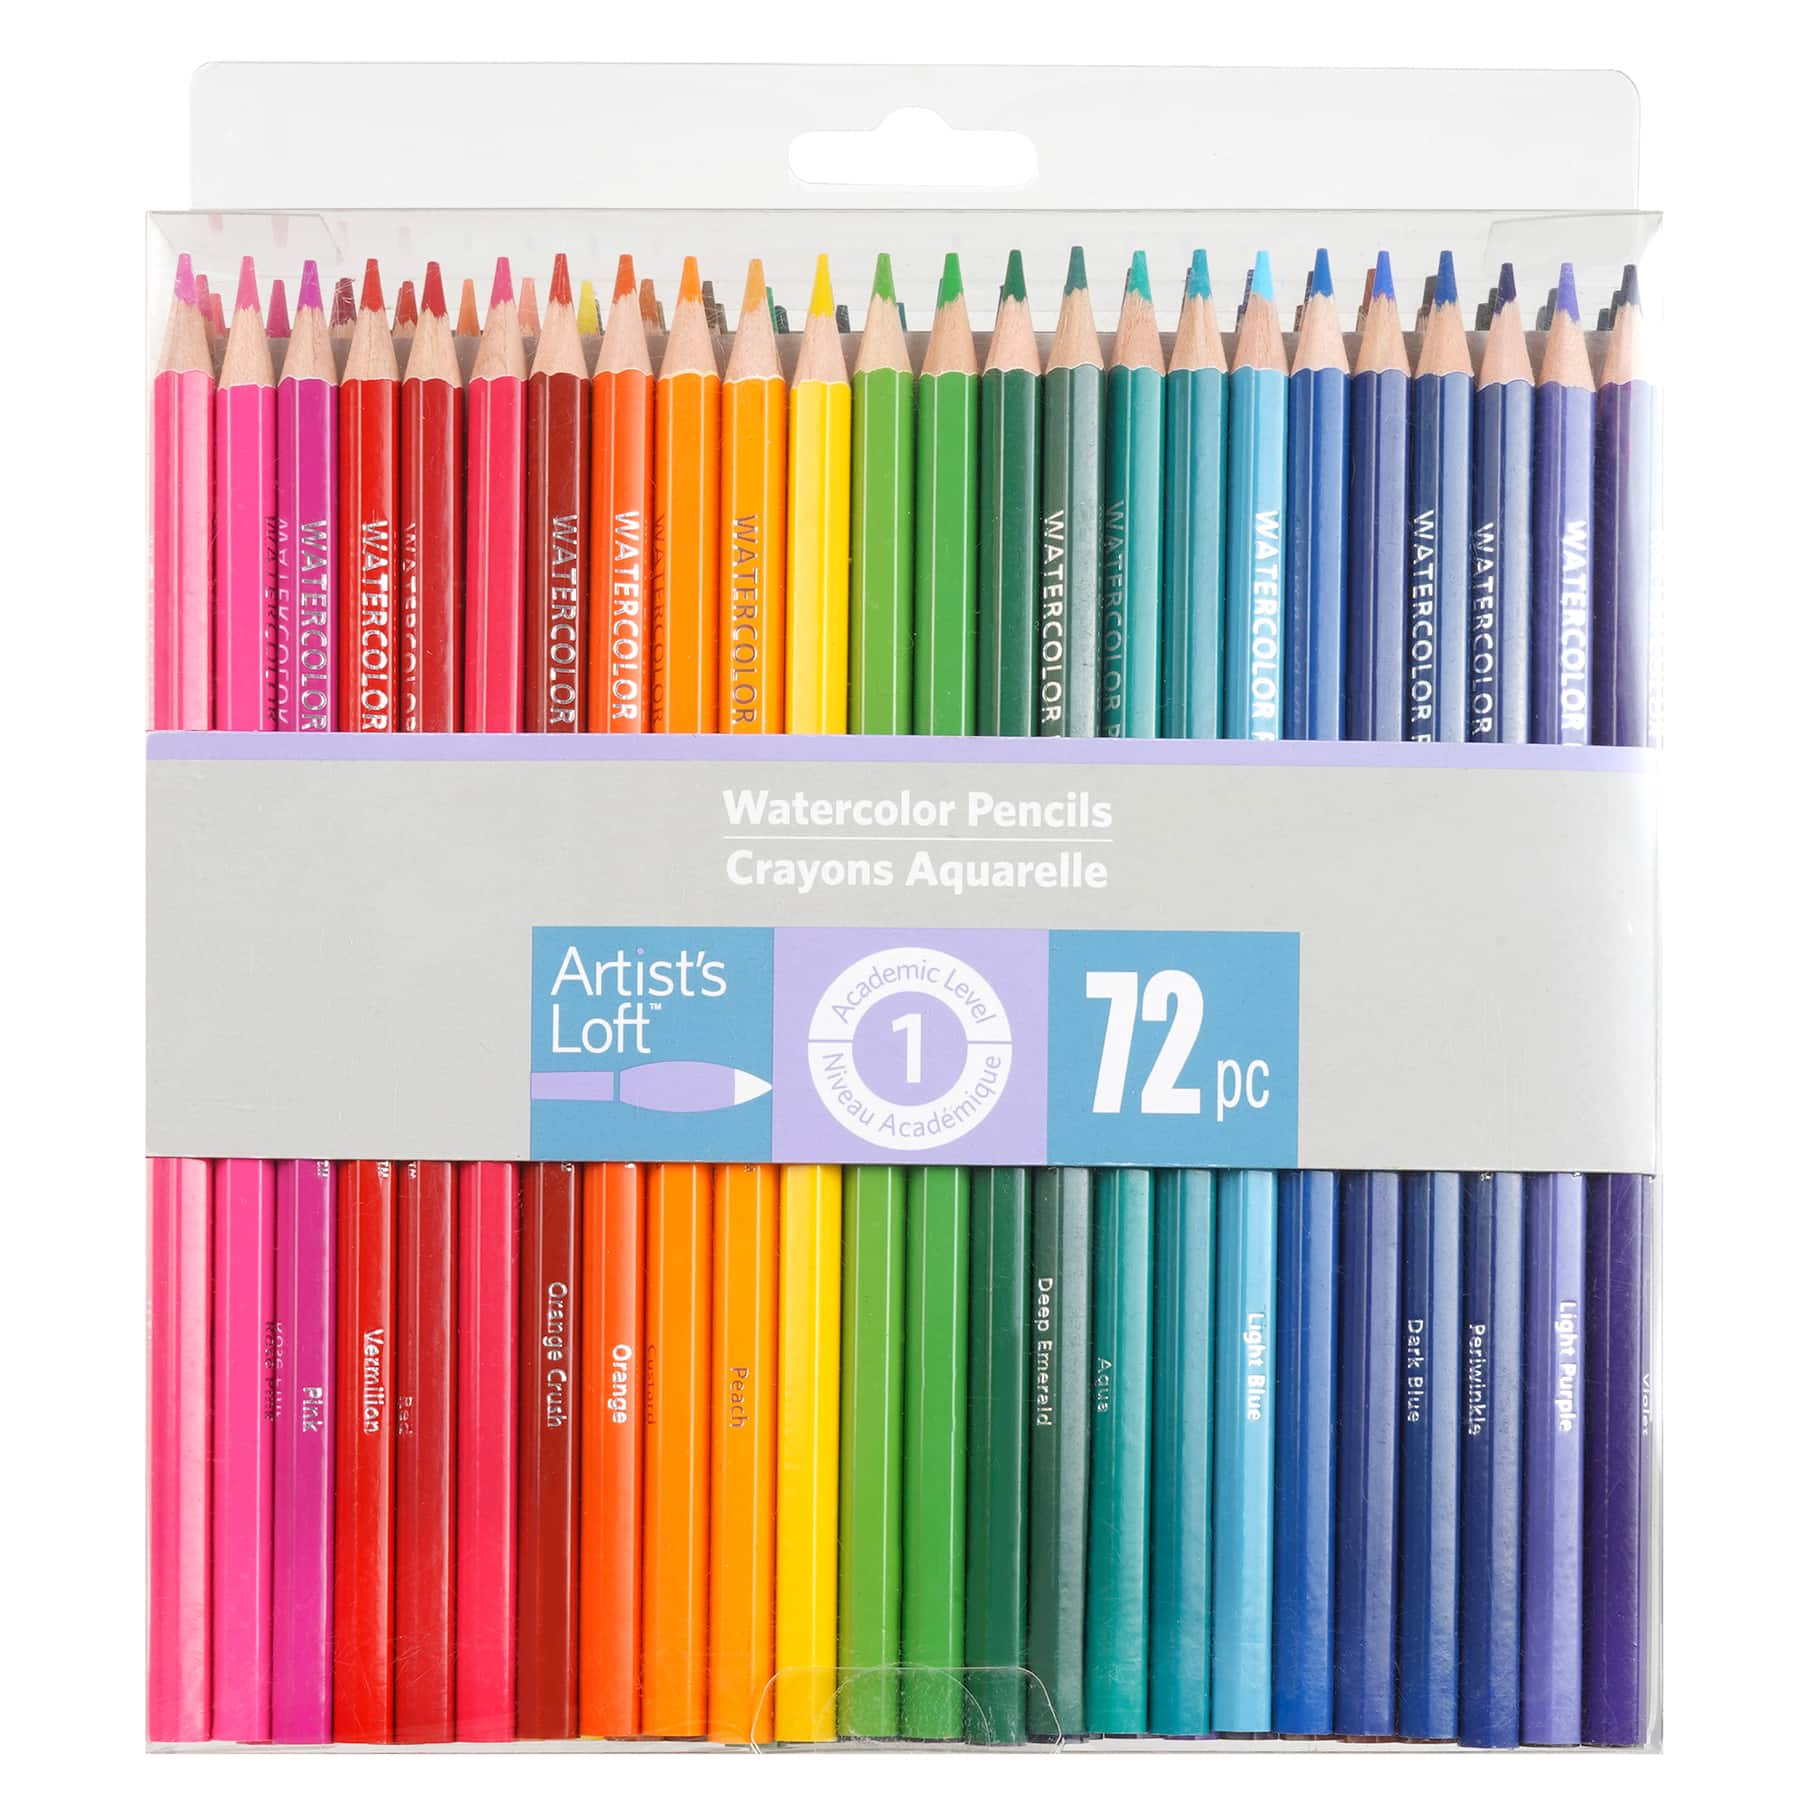 6 Packs: 72 ct. (432 total) Level 1 Watercolor Pencils by Artist's